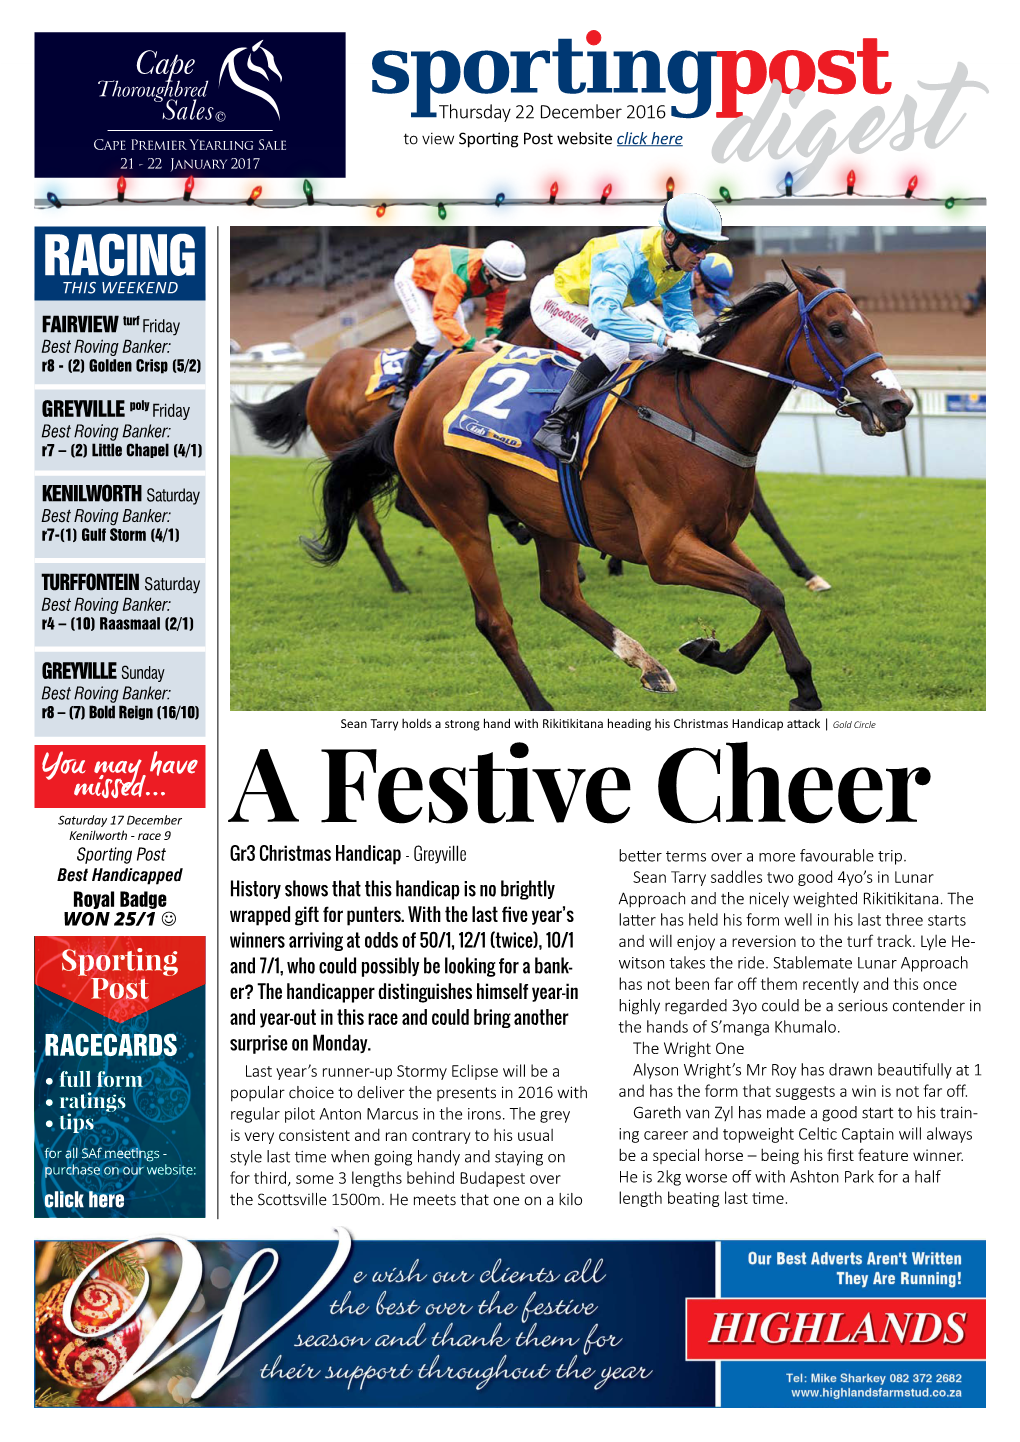 A Festive Cheer Sporting Post Gr3 Christmas Handicap - Greyville Better Terms Over a More Favourable Trip